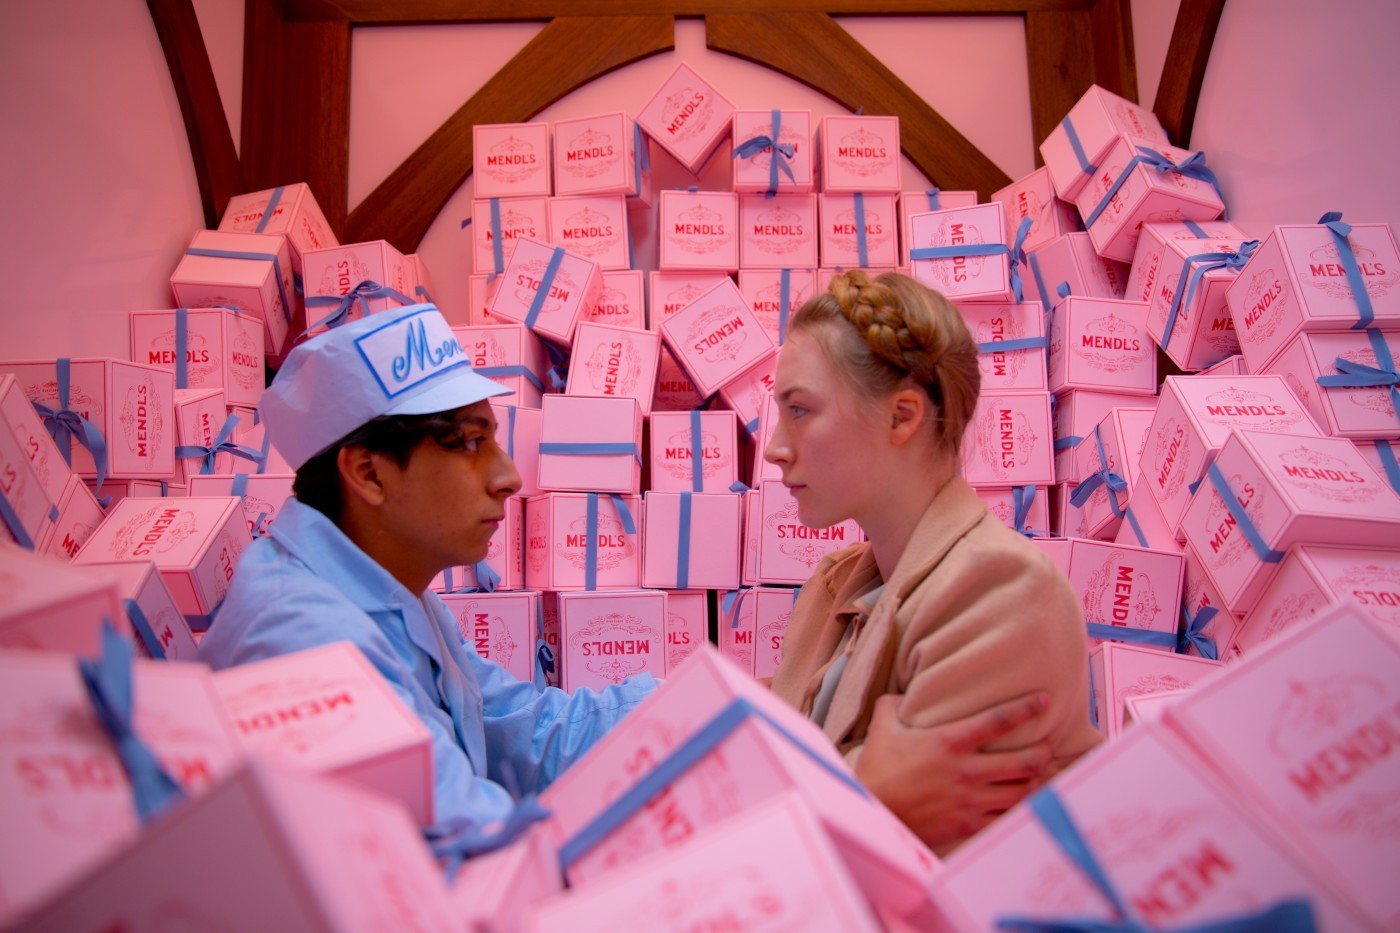 How to bake like a Wes Anderson character